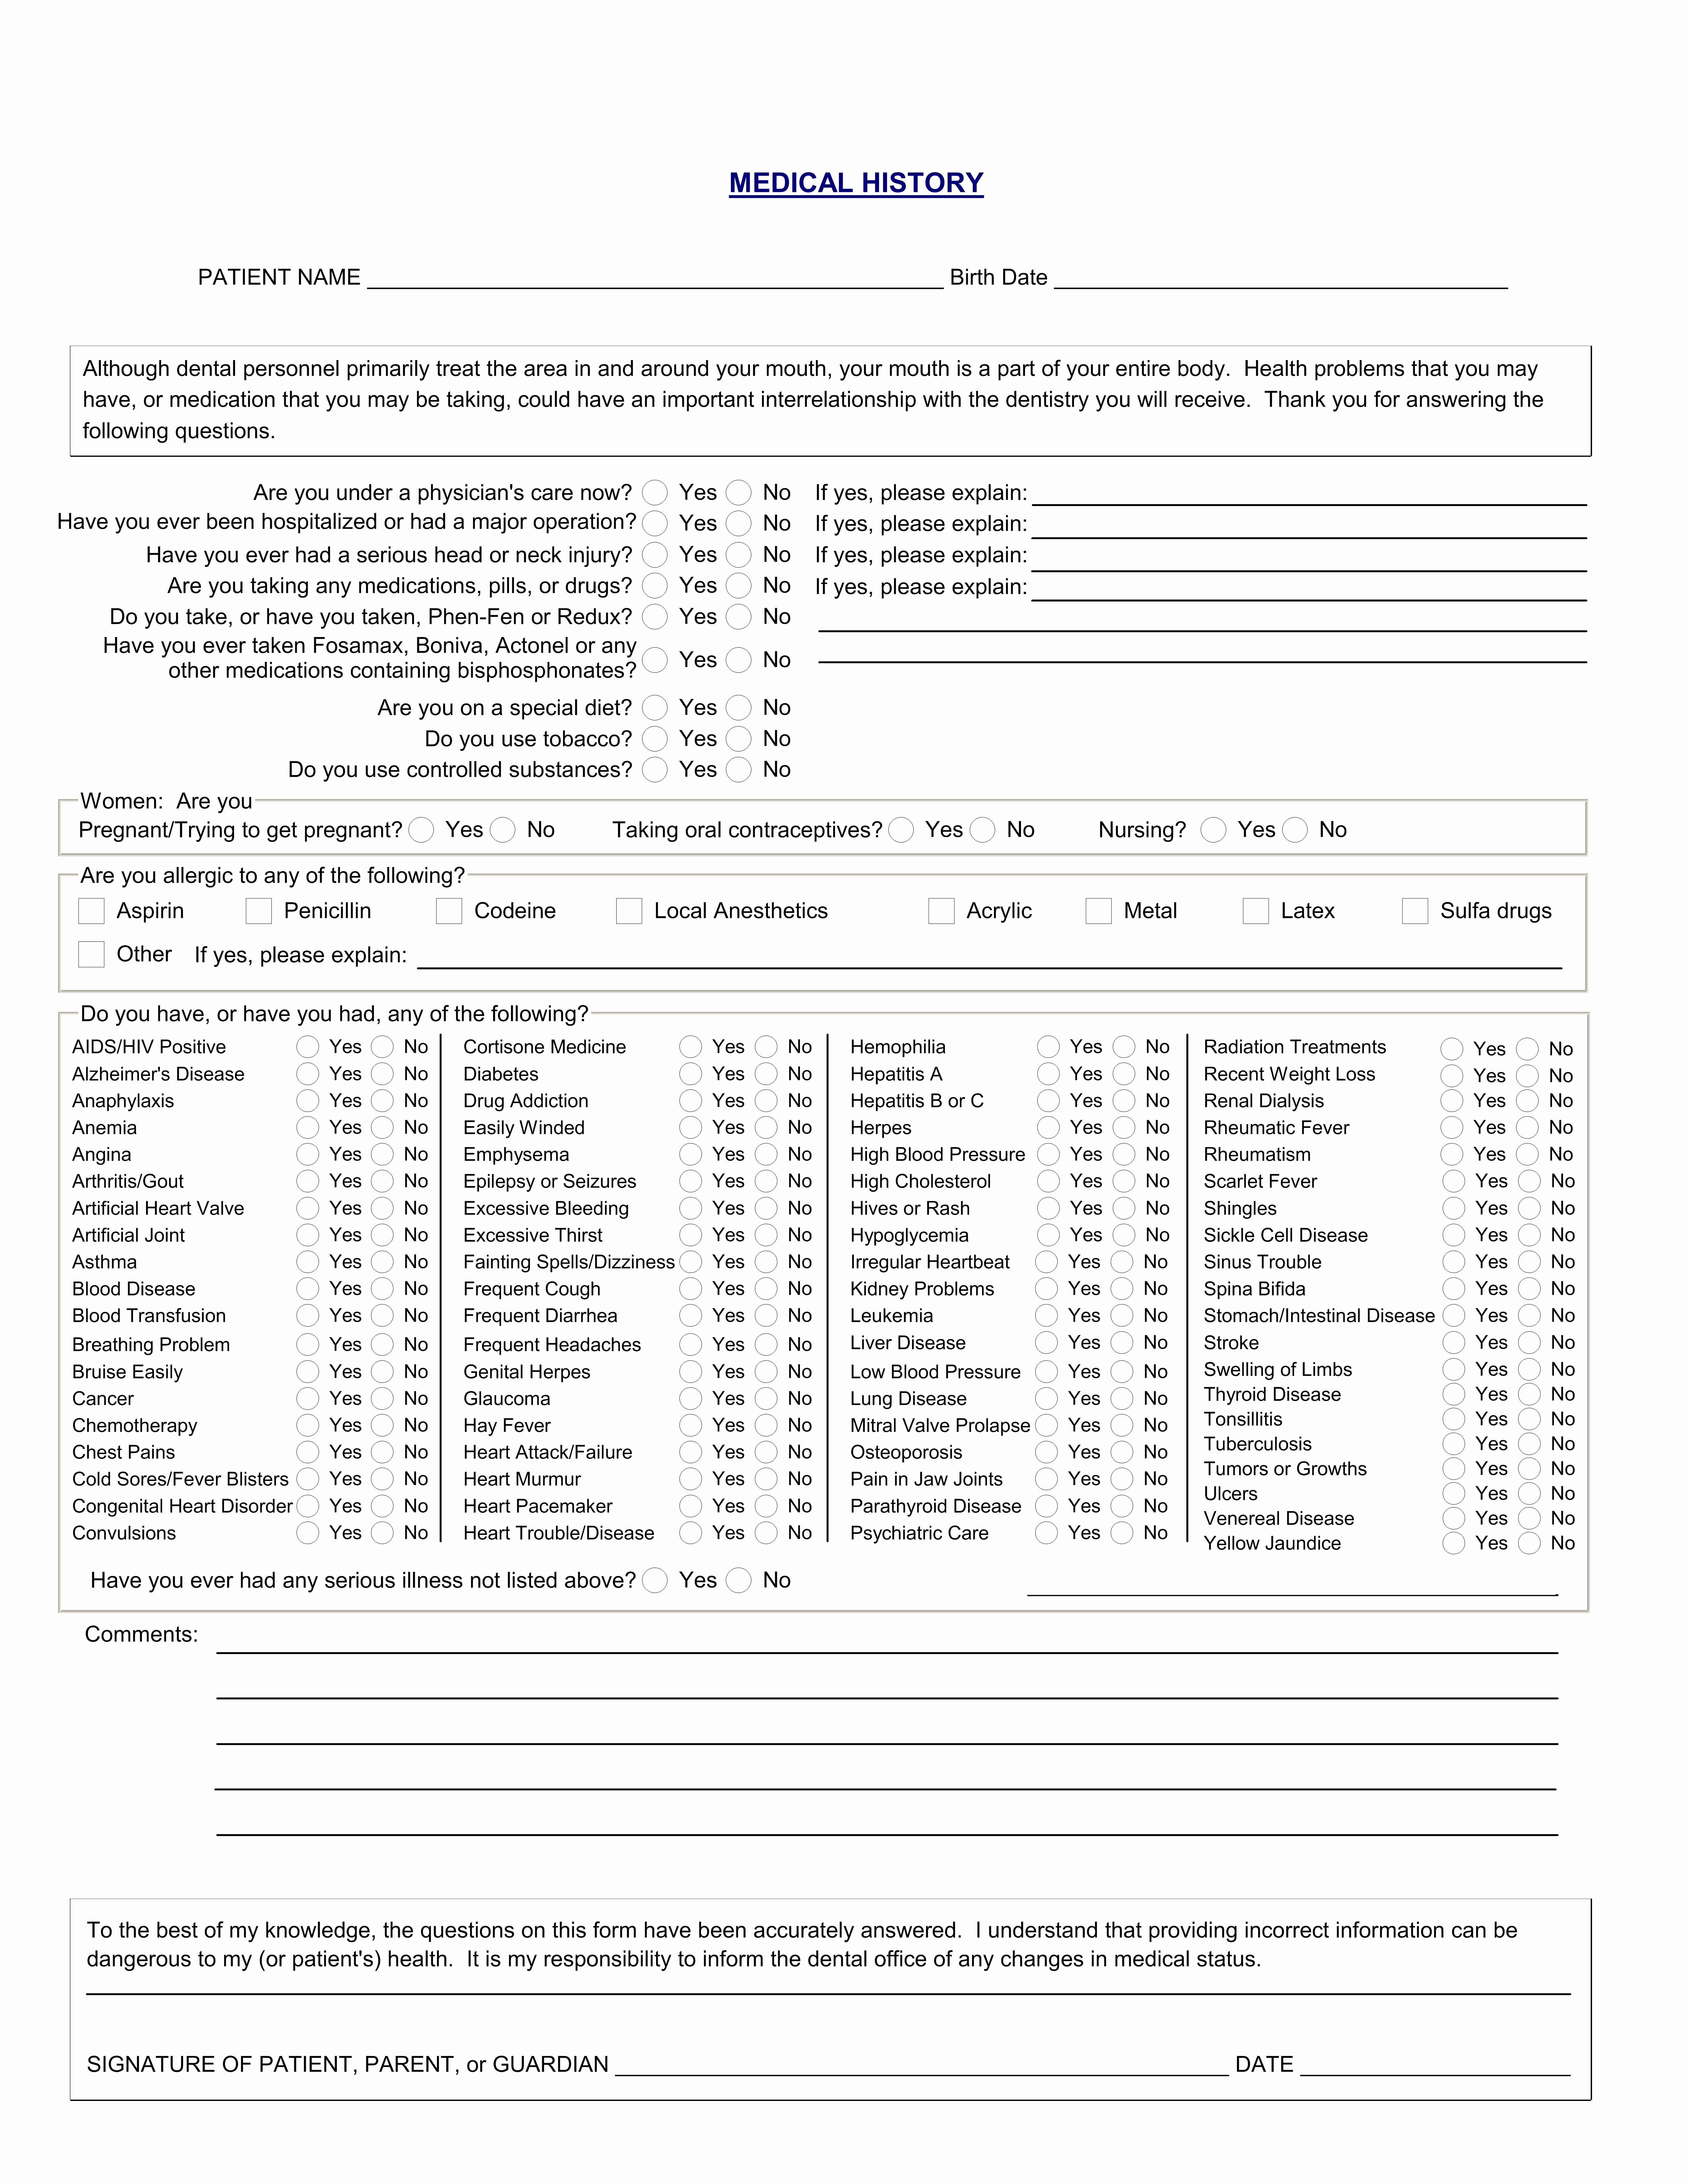 Dental Office forms Templates Lovely Medical History form for Dental Fice